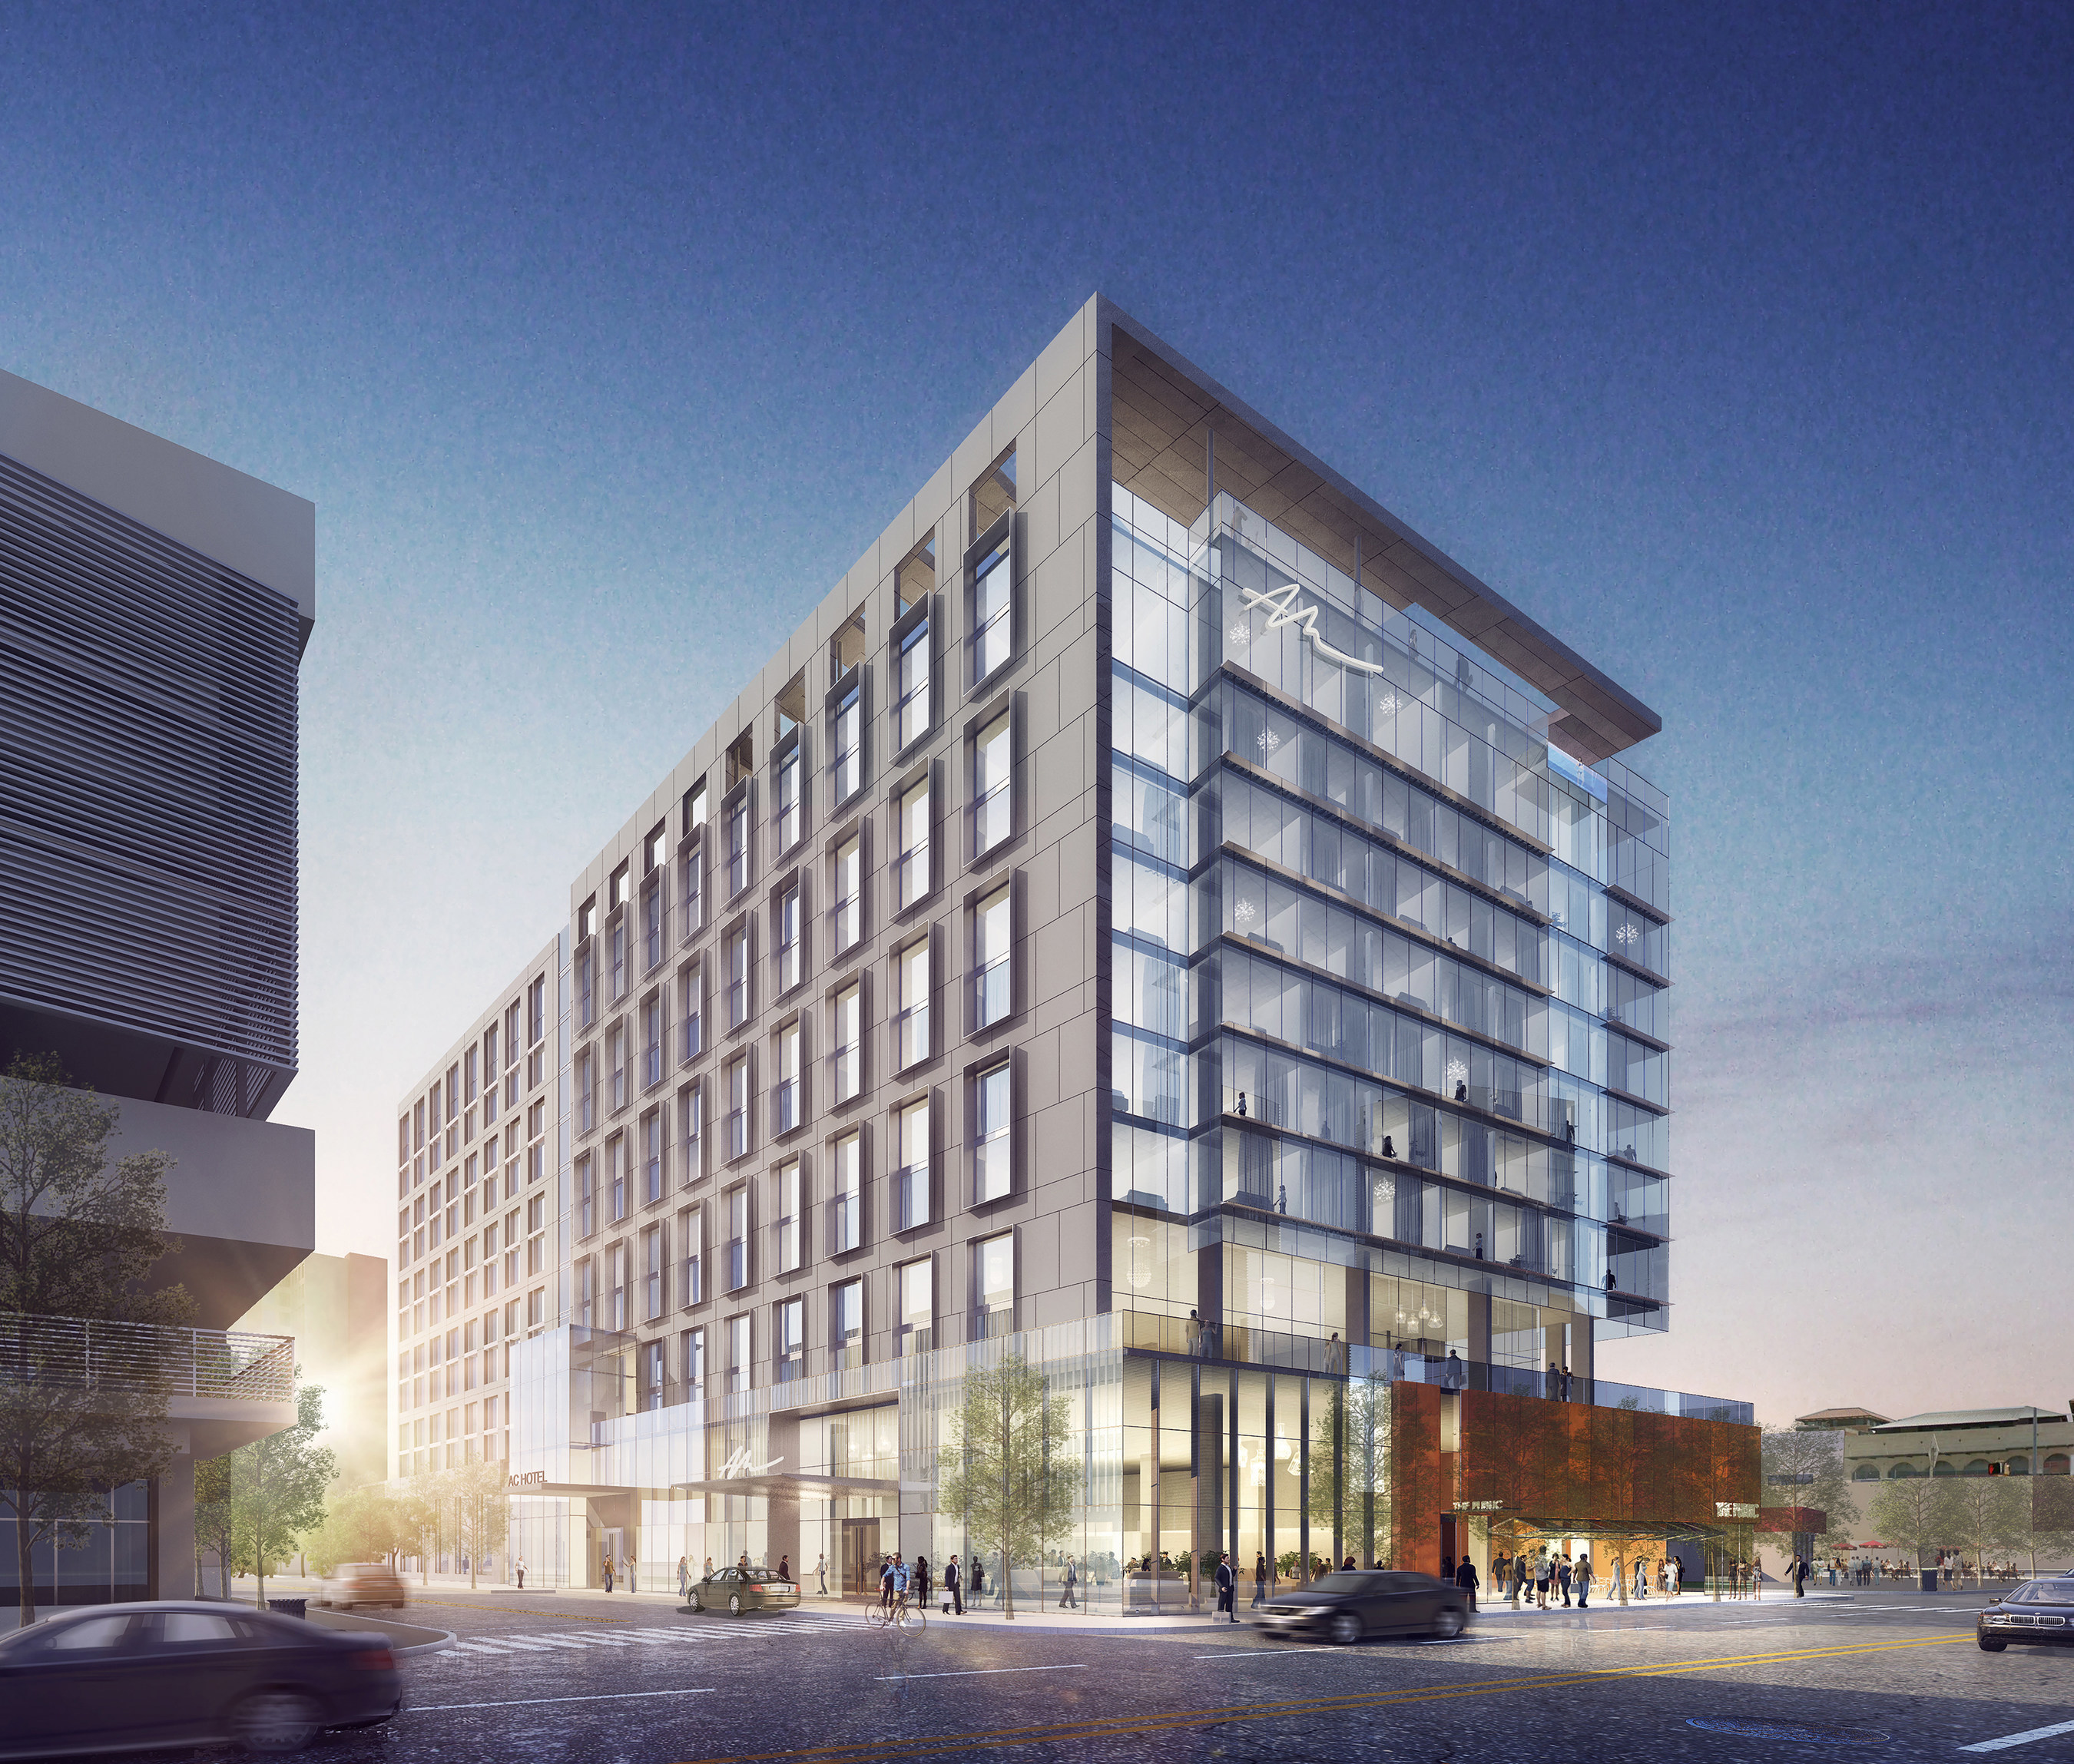 White Lodging announced it will develop a dual-branded AC Hotel by Marriott and Autograph Collection hotel adjacent to the University of Texas campus. The hotel is scheduled to open in 2019, and is one of two properties announced by the company Wednesday that will add around 1,000 hotel rooms to downtown Austin.